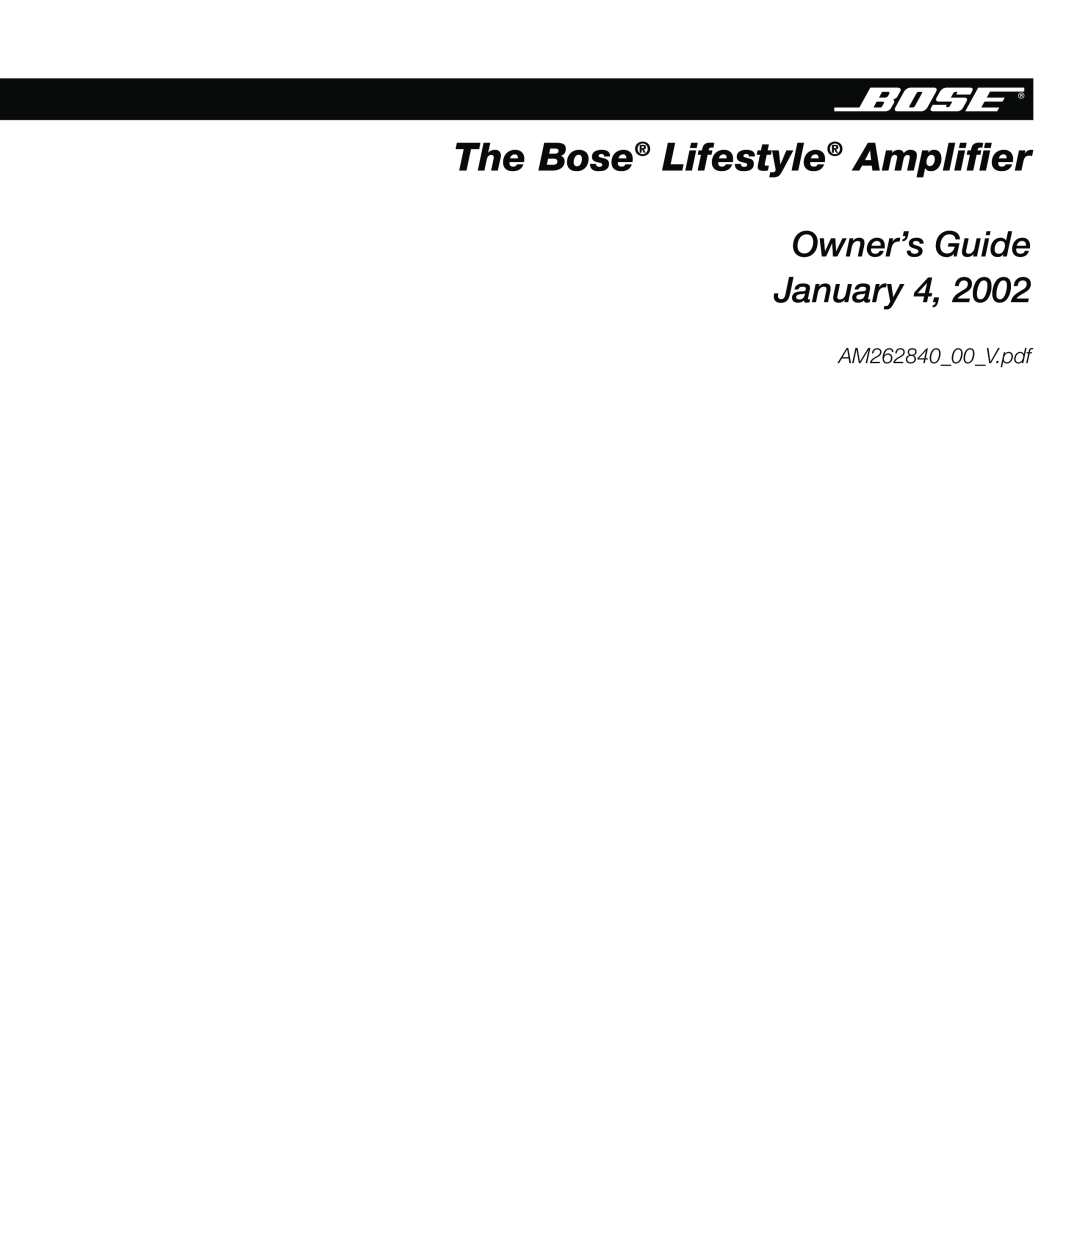 Bose AM262840 manual The Bose Lifestyle Ampliﬁer, Owner’s Guide January 